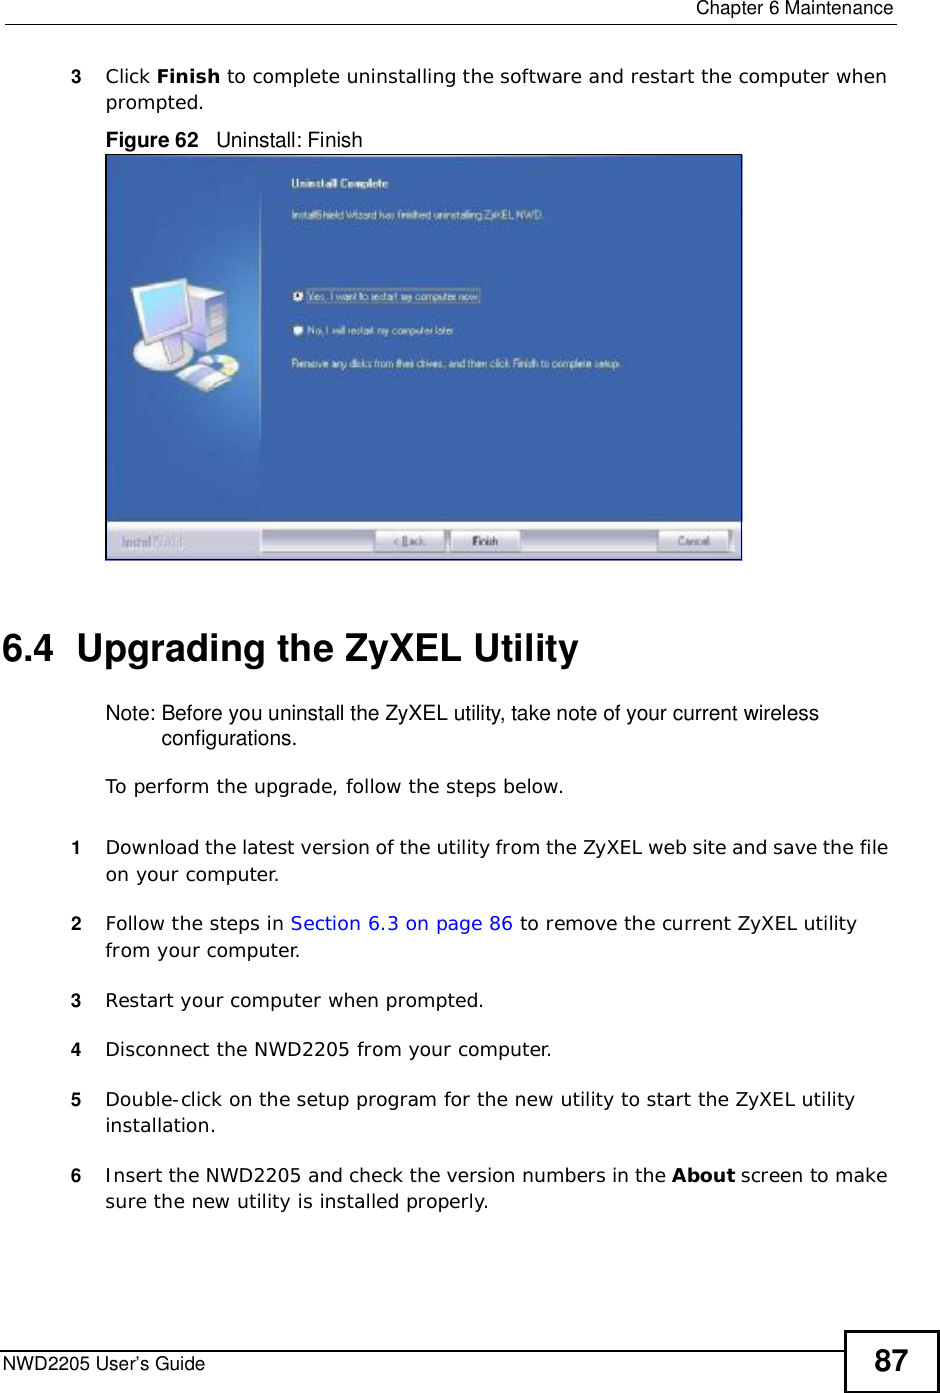  Chapter 6MaintenanceNWD2205 User’s Guide 873Click Finish to complete uninstalling the software and restart the computer when prompted.Figure 62   Uninstall: Finish 6.4  Upgrading the ZyXEL UtilityNote: Before you uninstall the ZyXEL utility, take note of your current wireless configurations.To perform the upgrade, follow the steps below.1Download the latest version of the utility from the ZyXEL web site and save the file on your computer.2Follow the steps in Section 6.3 on page 86 to remove the current ZyXEL utility from your computer.3Restart your computer when prompted.4Disconnect the NWD2205 from your computer.5Double-click on the setup program for the new utility to start the ZyXEL utility installation.6Insert the NWD2205 and check the version numbers in the About screen to make sure the new utility is installed properly.